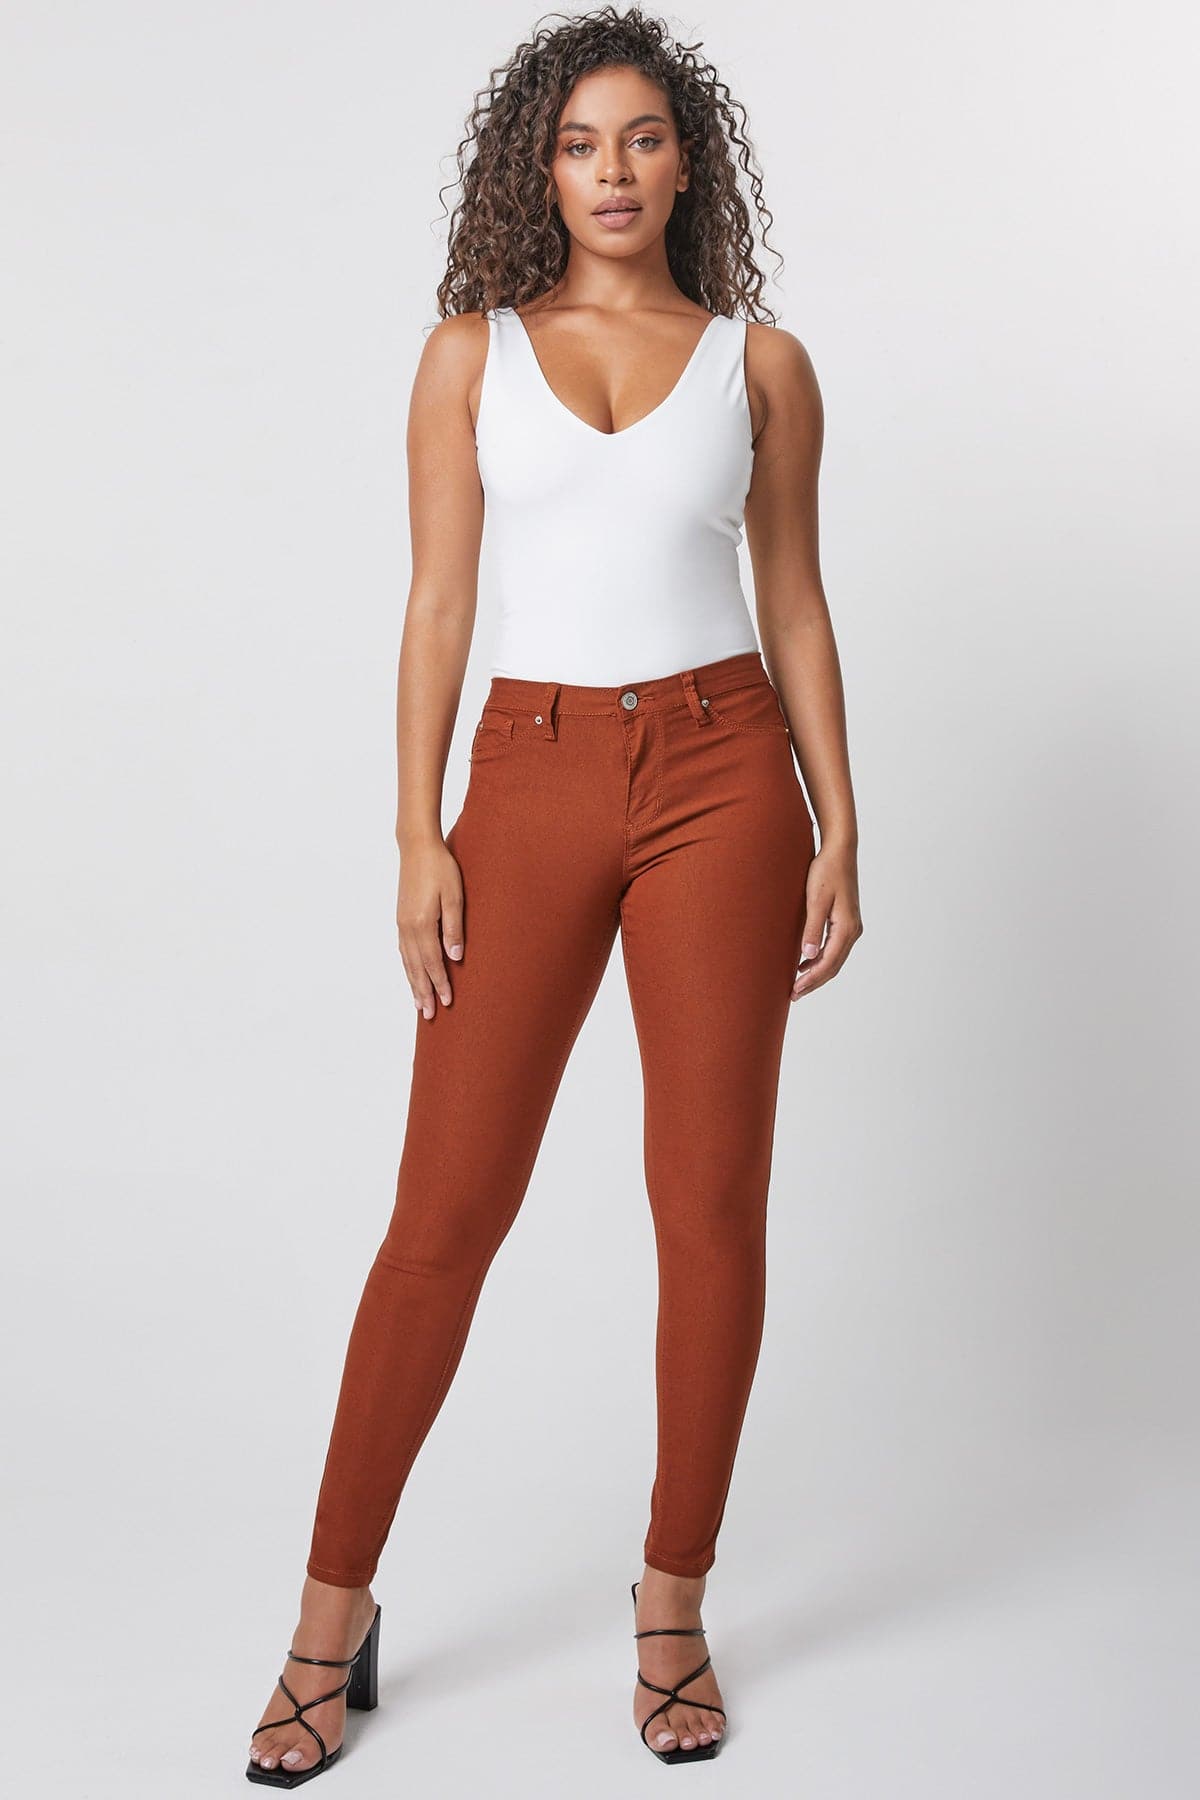 Women's Hyperstretch Forever Color Pants - Warm Tones